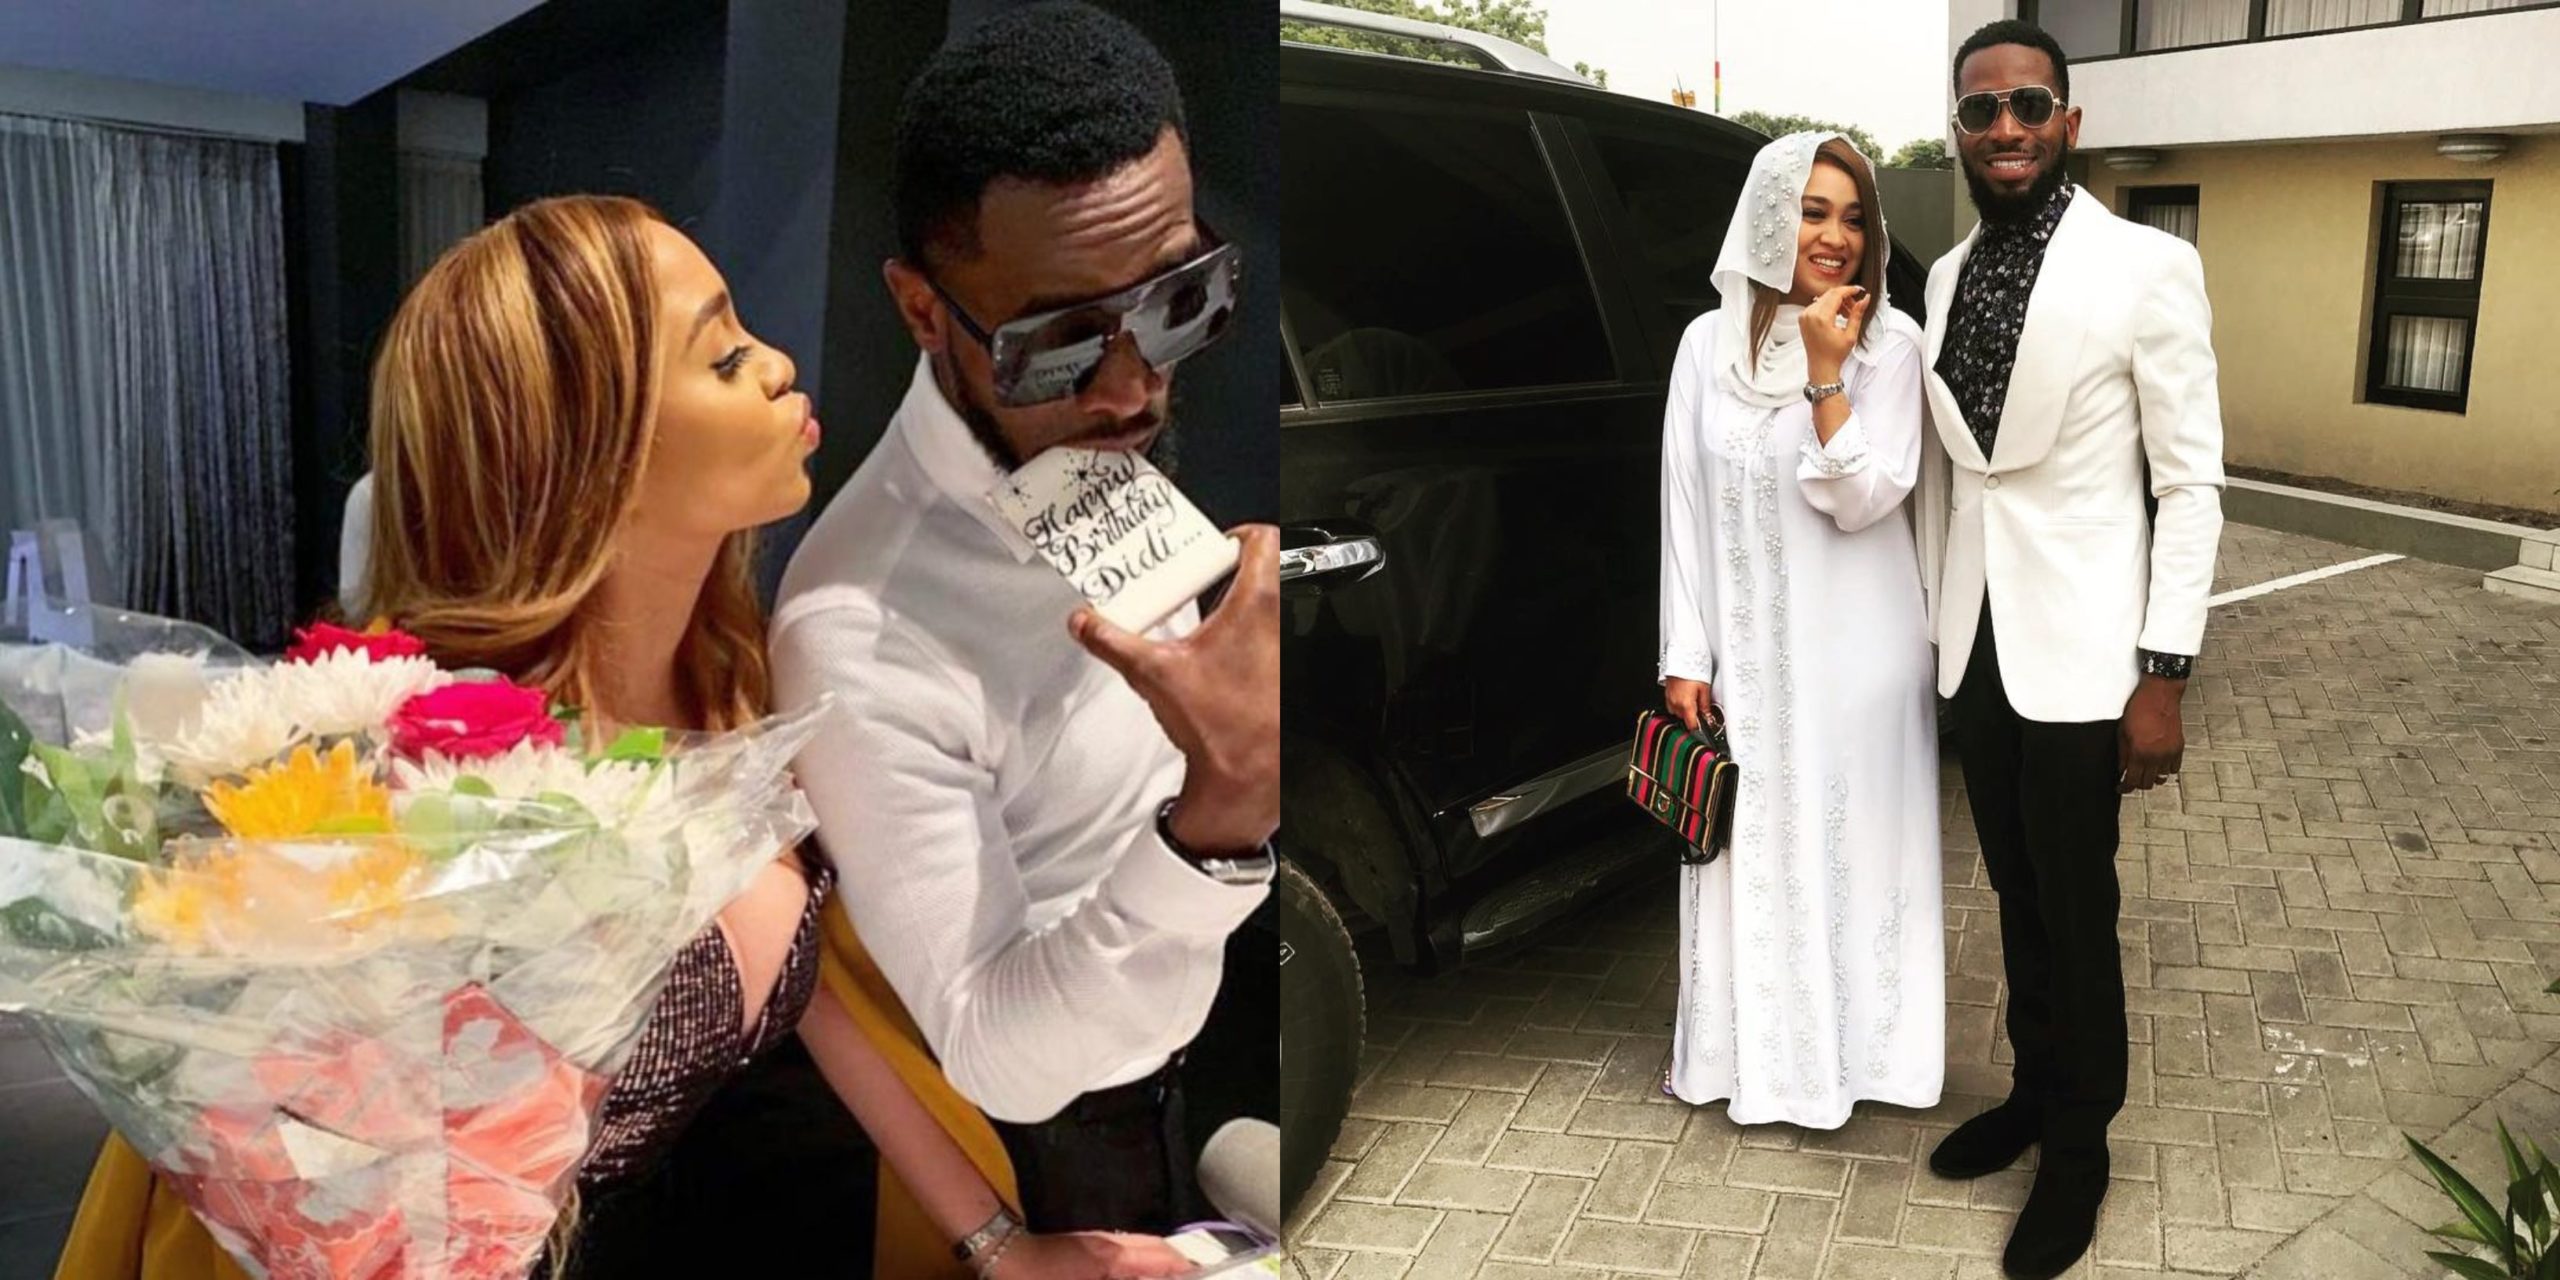 D’banj’s wife, Lineo pens down heartfelt message as she shares first photos of her son